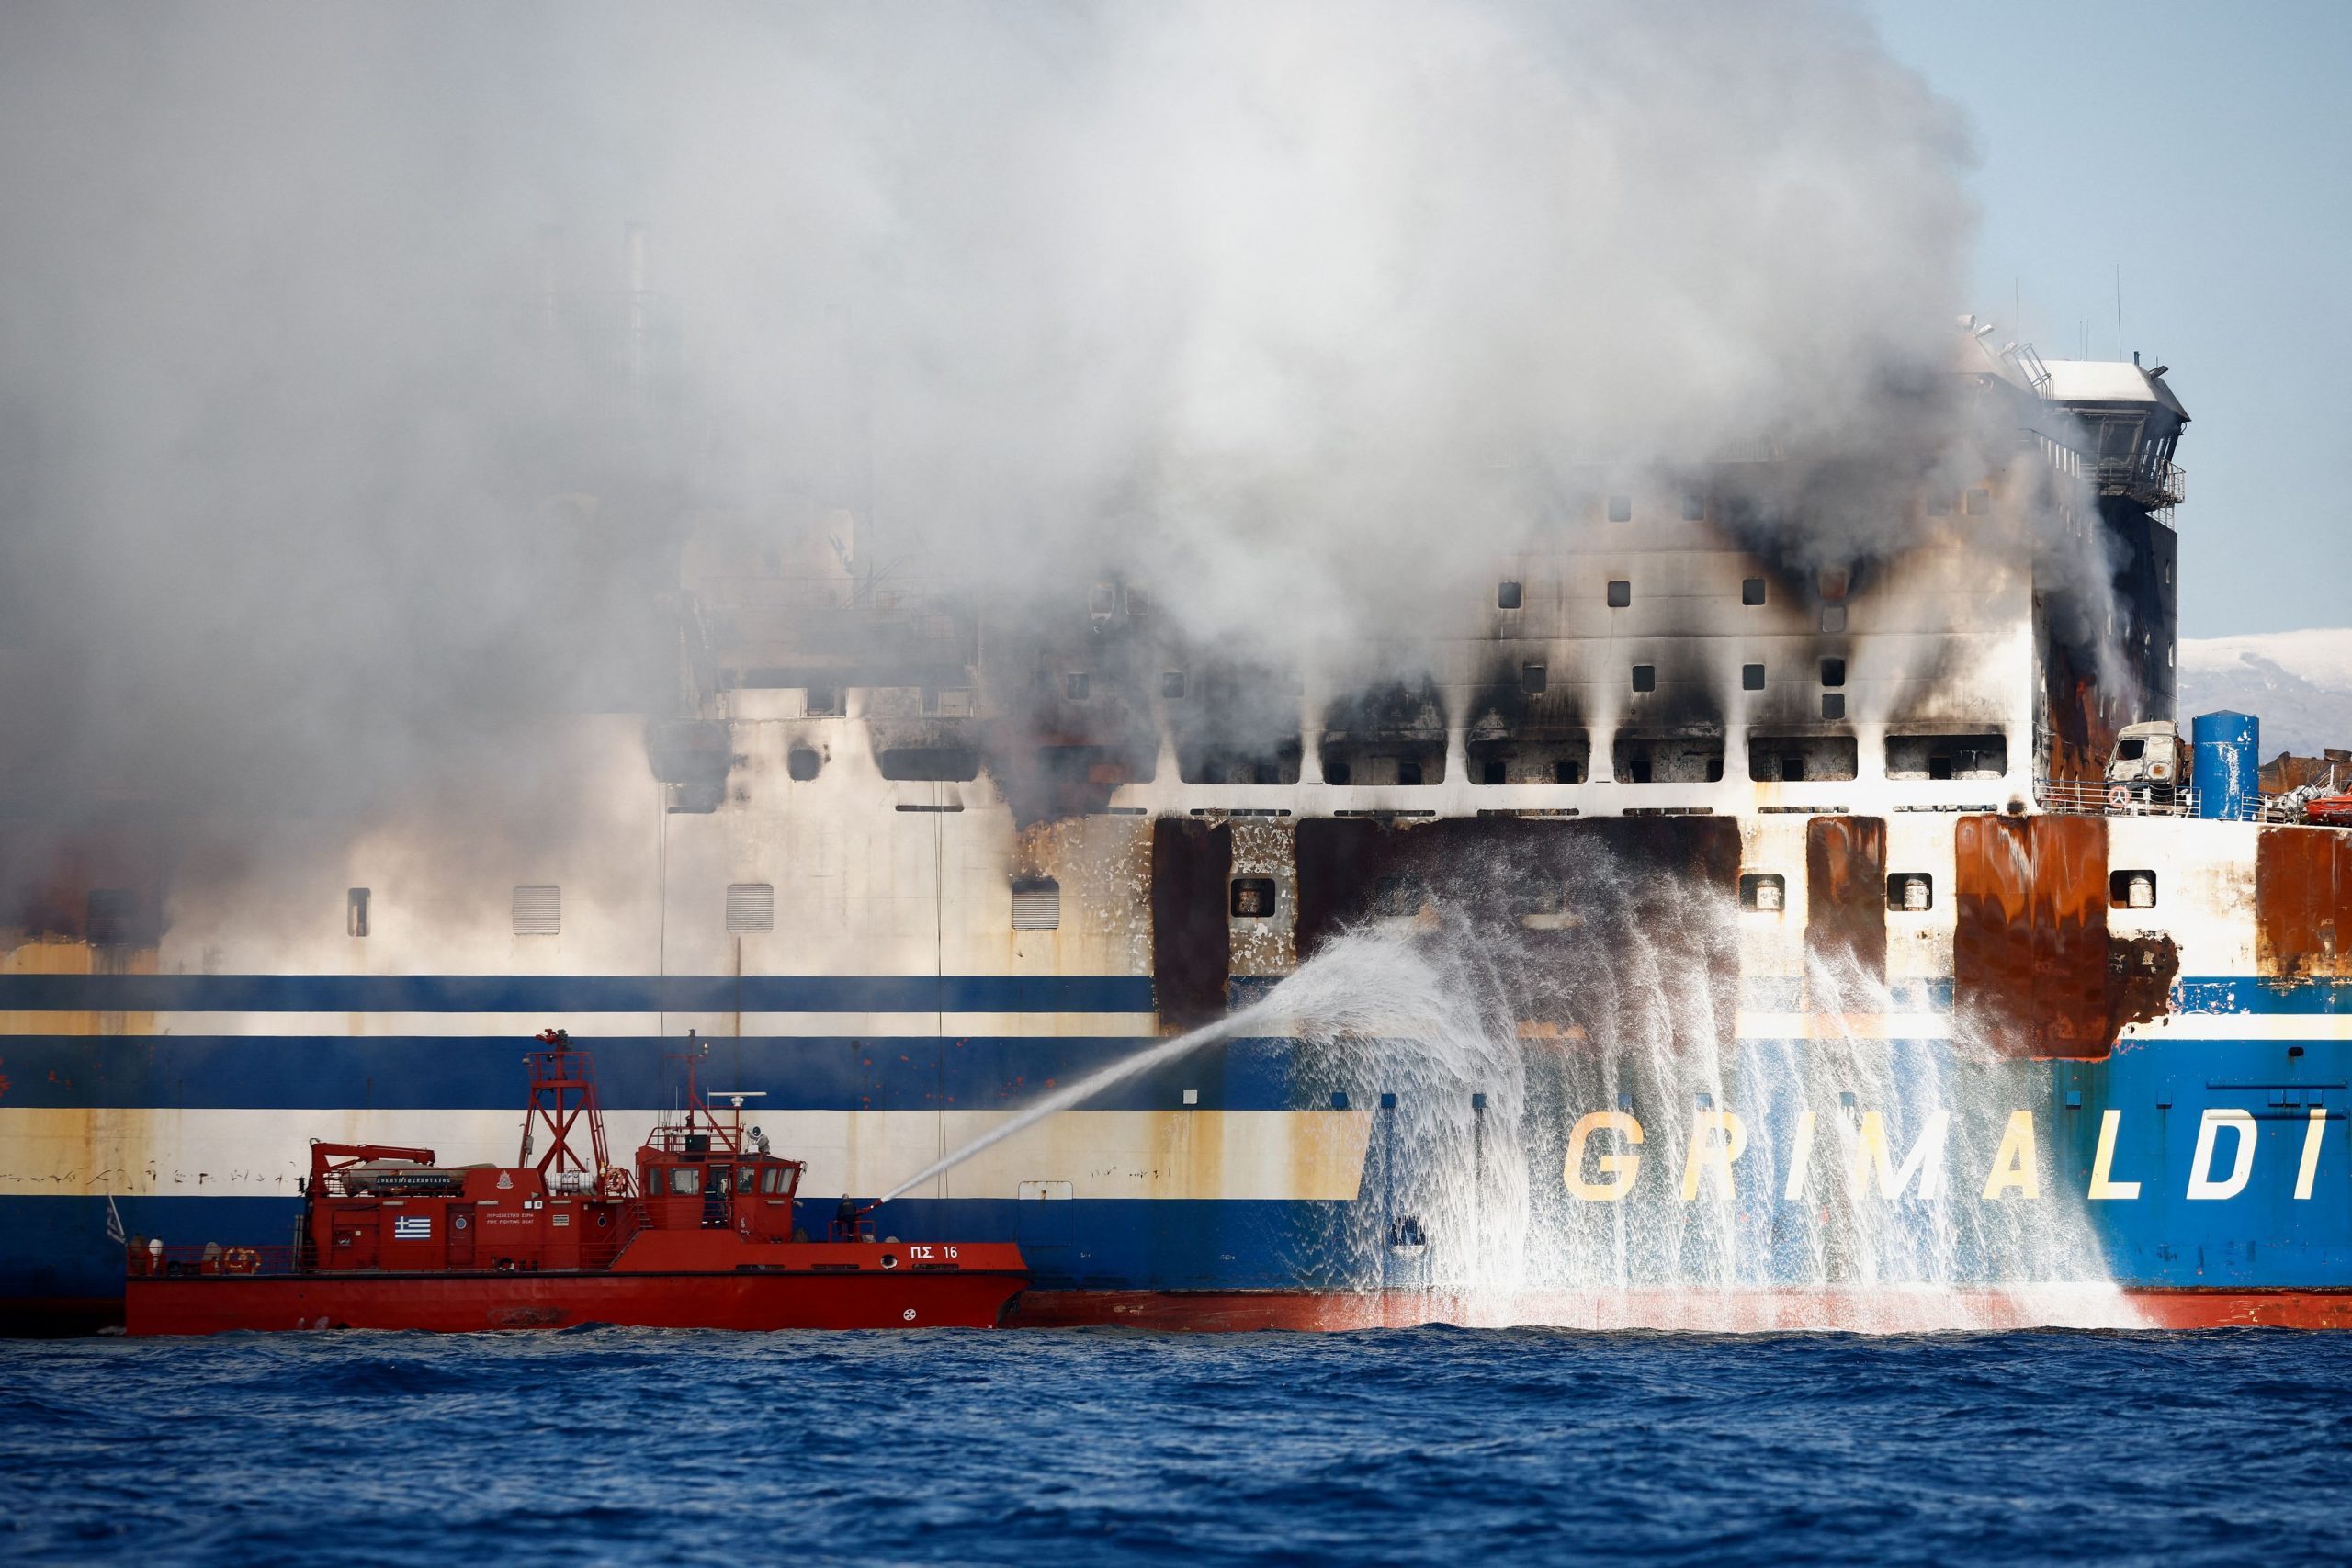 Euroferry Olympia: Information for another 4 or 5 survivors on the burning ship